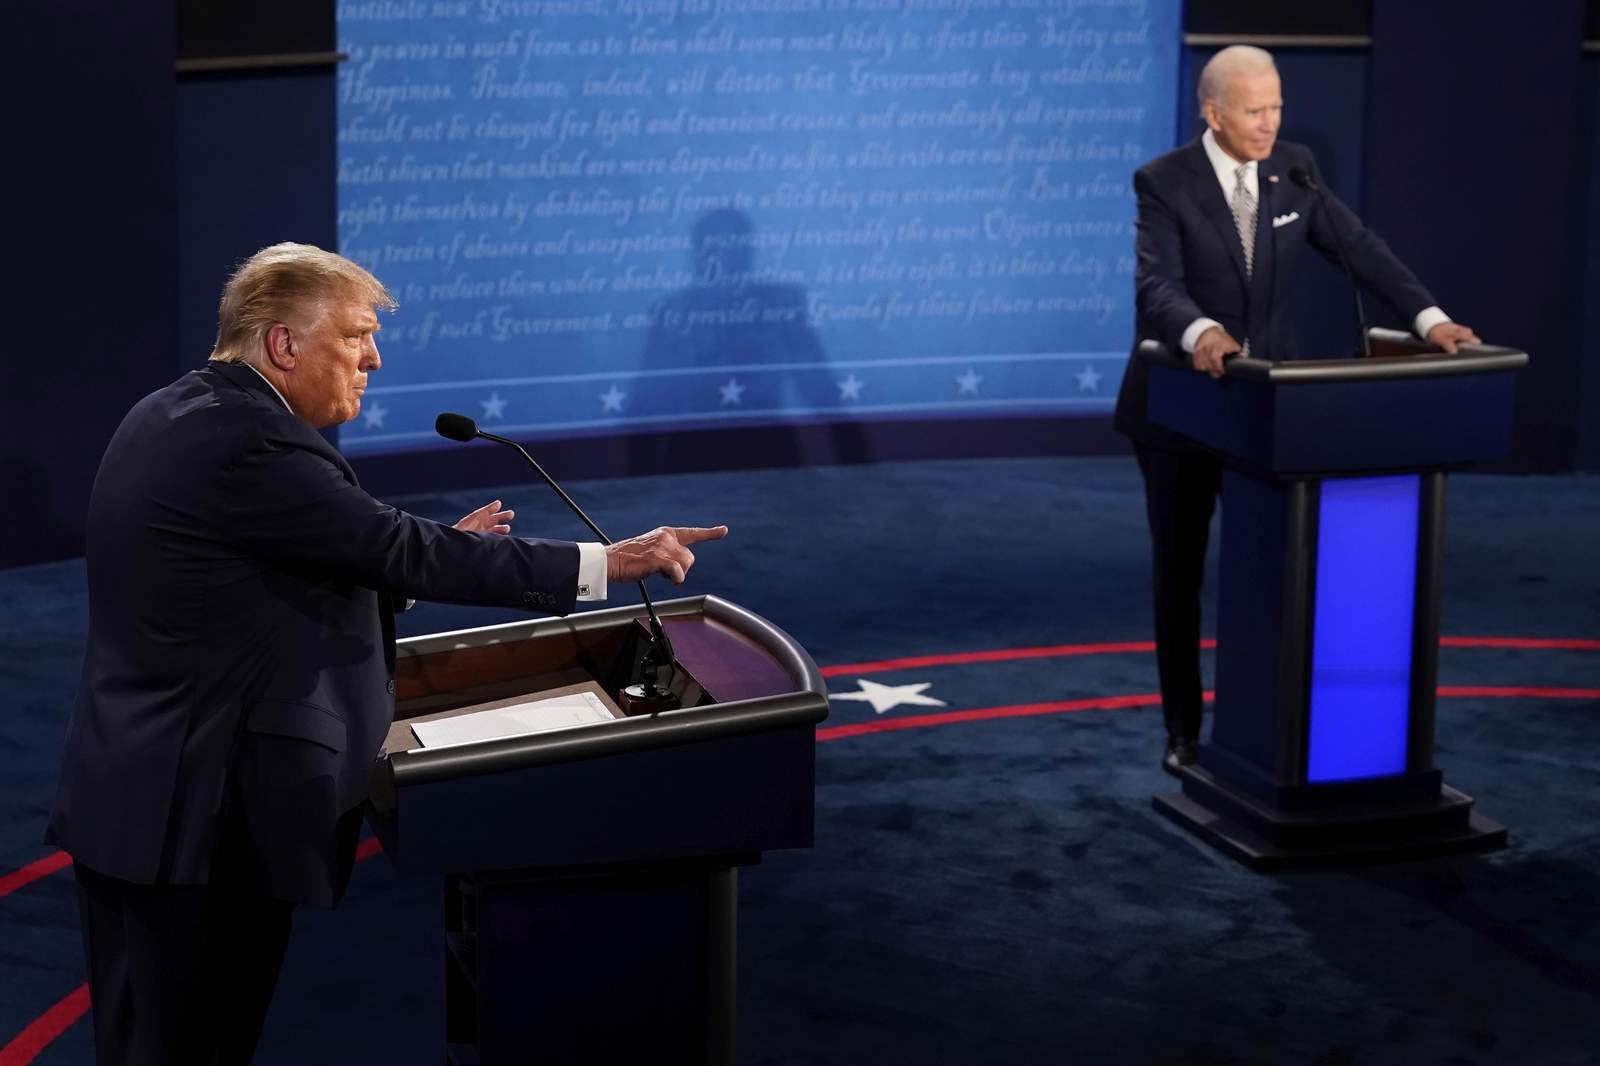 ‘My mind is made up’: Why some viewers say Trump, Biden debates won’t affect their vote